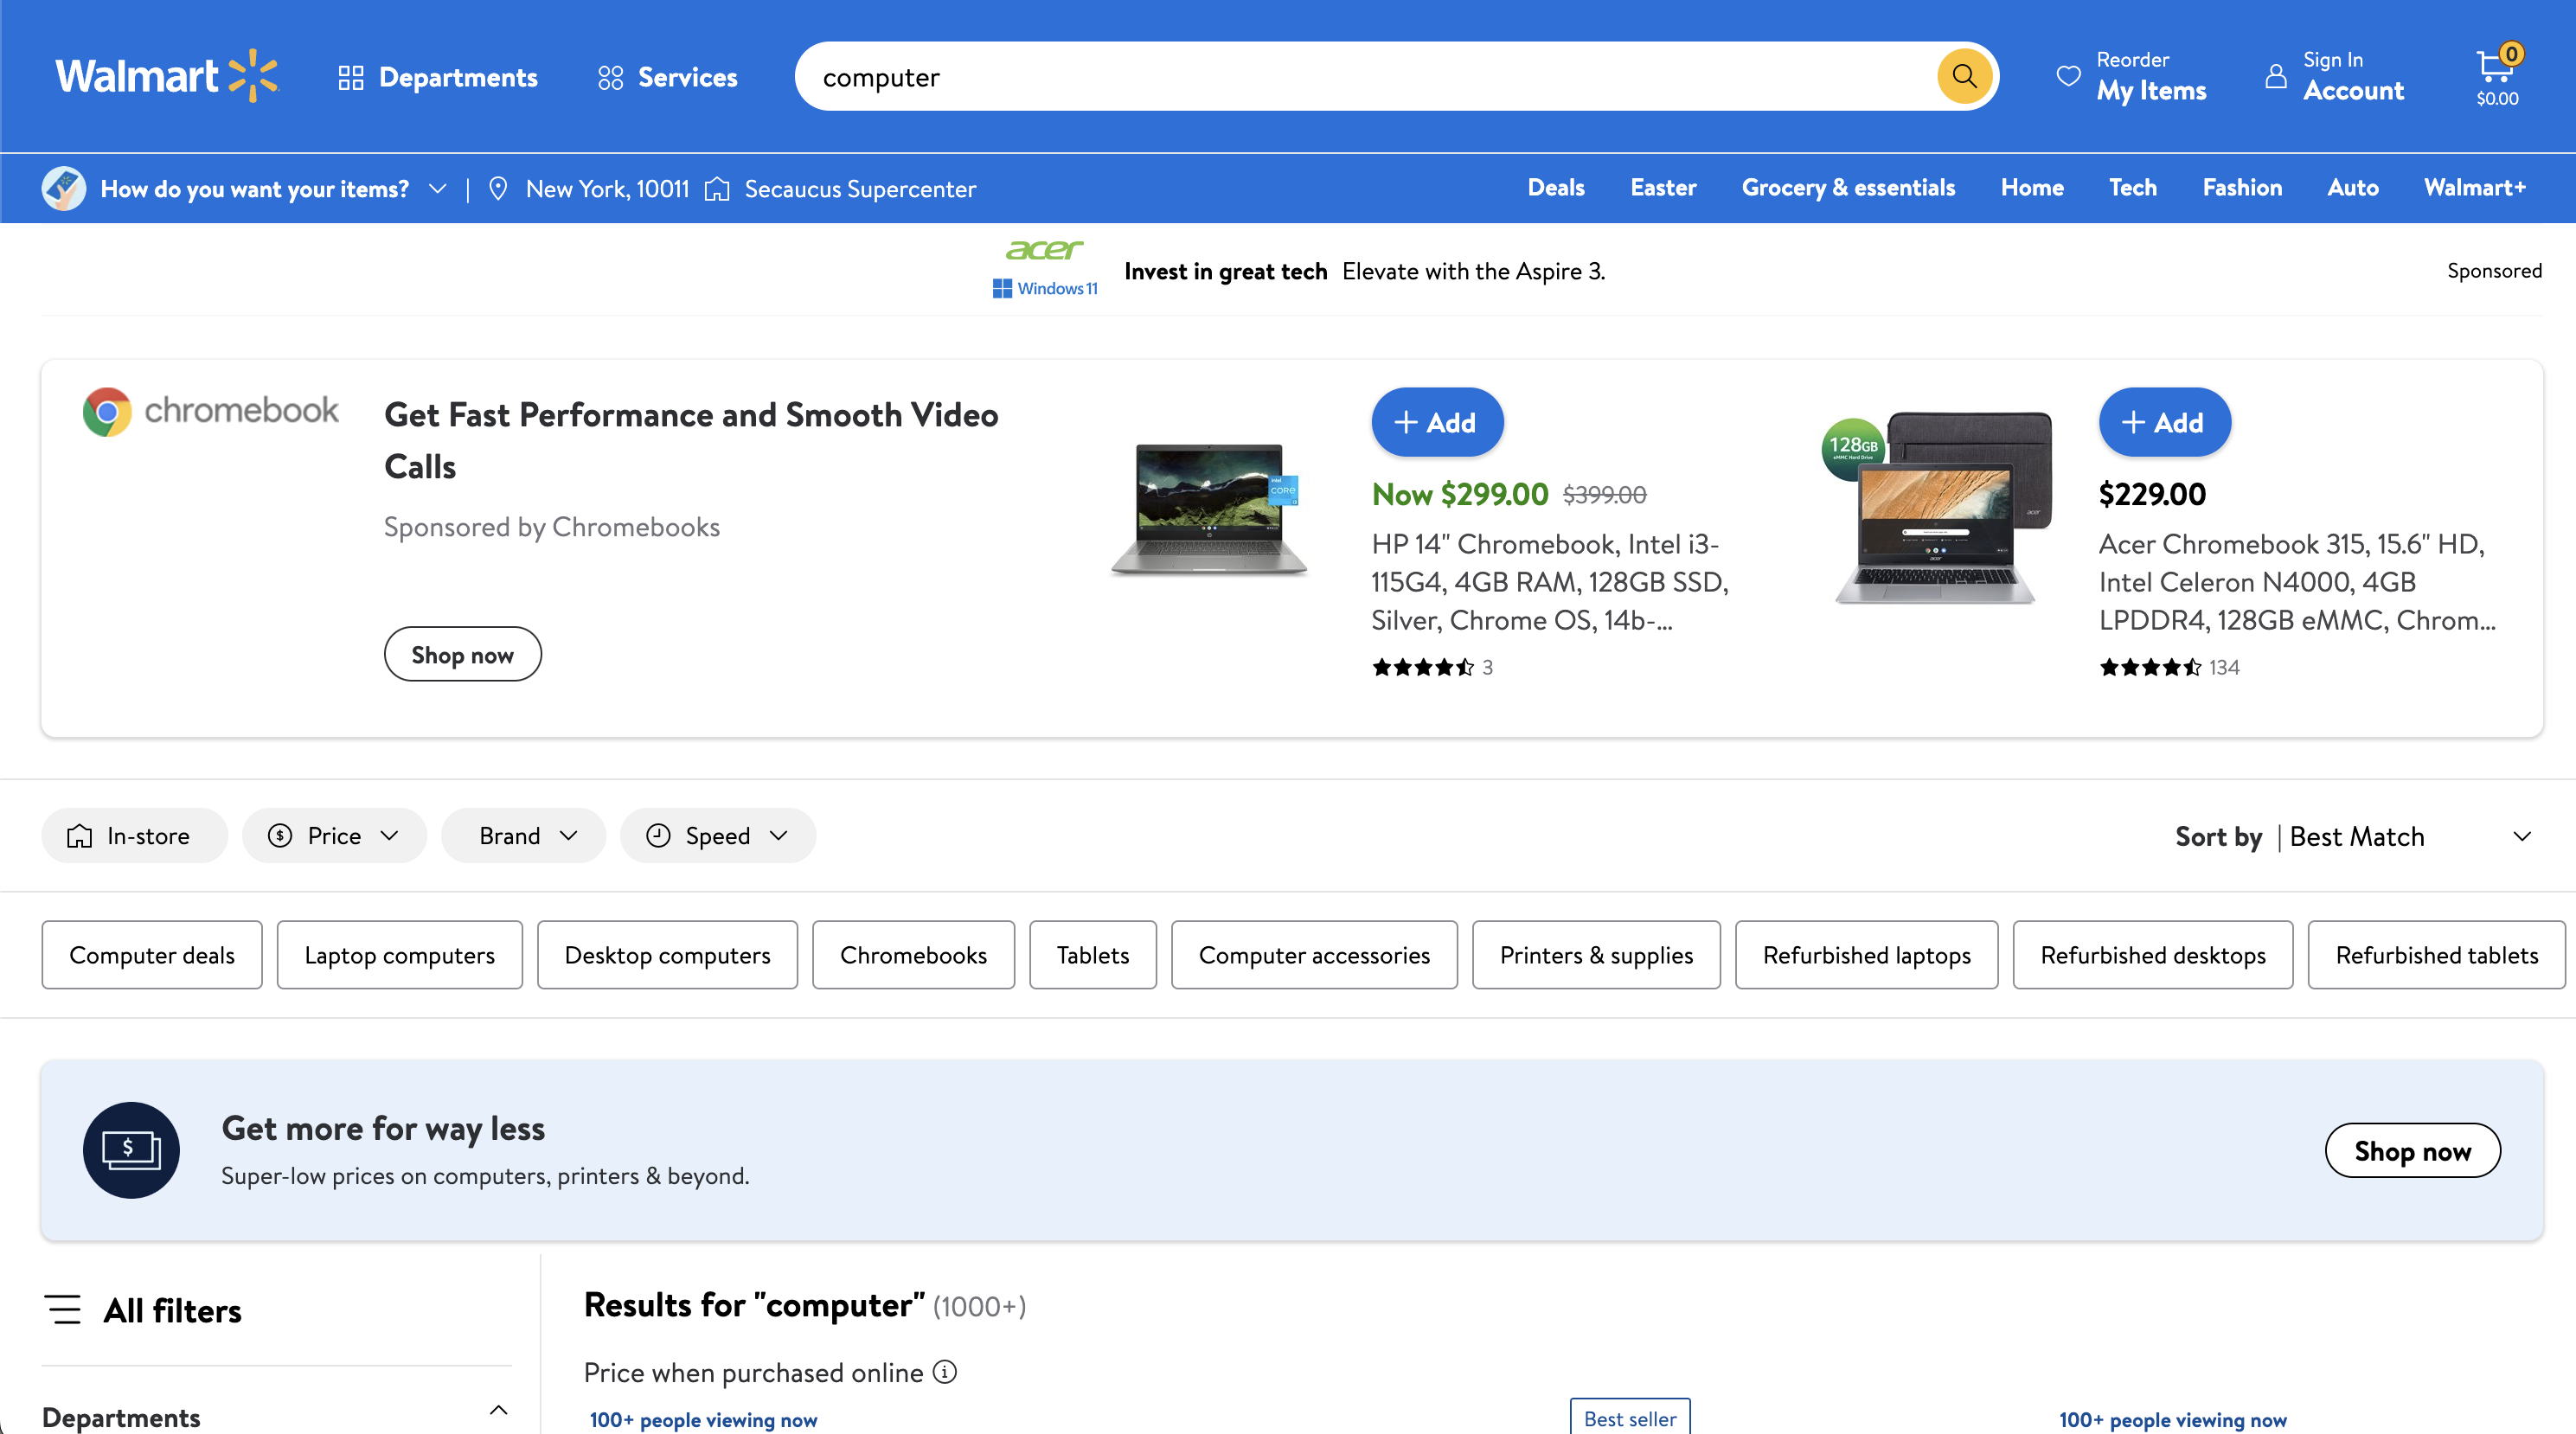 Search on Walmart.com for 'computers'